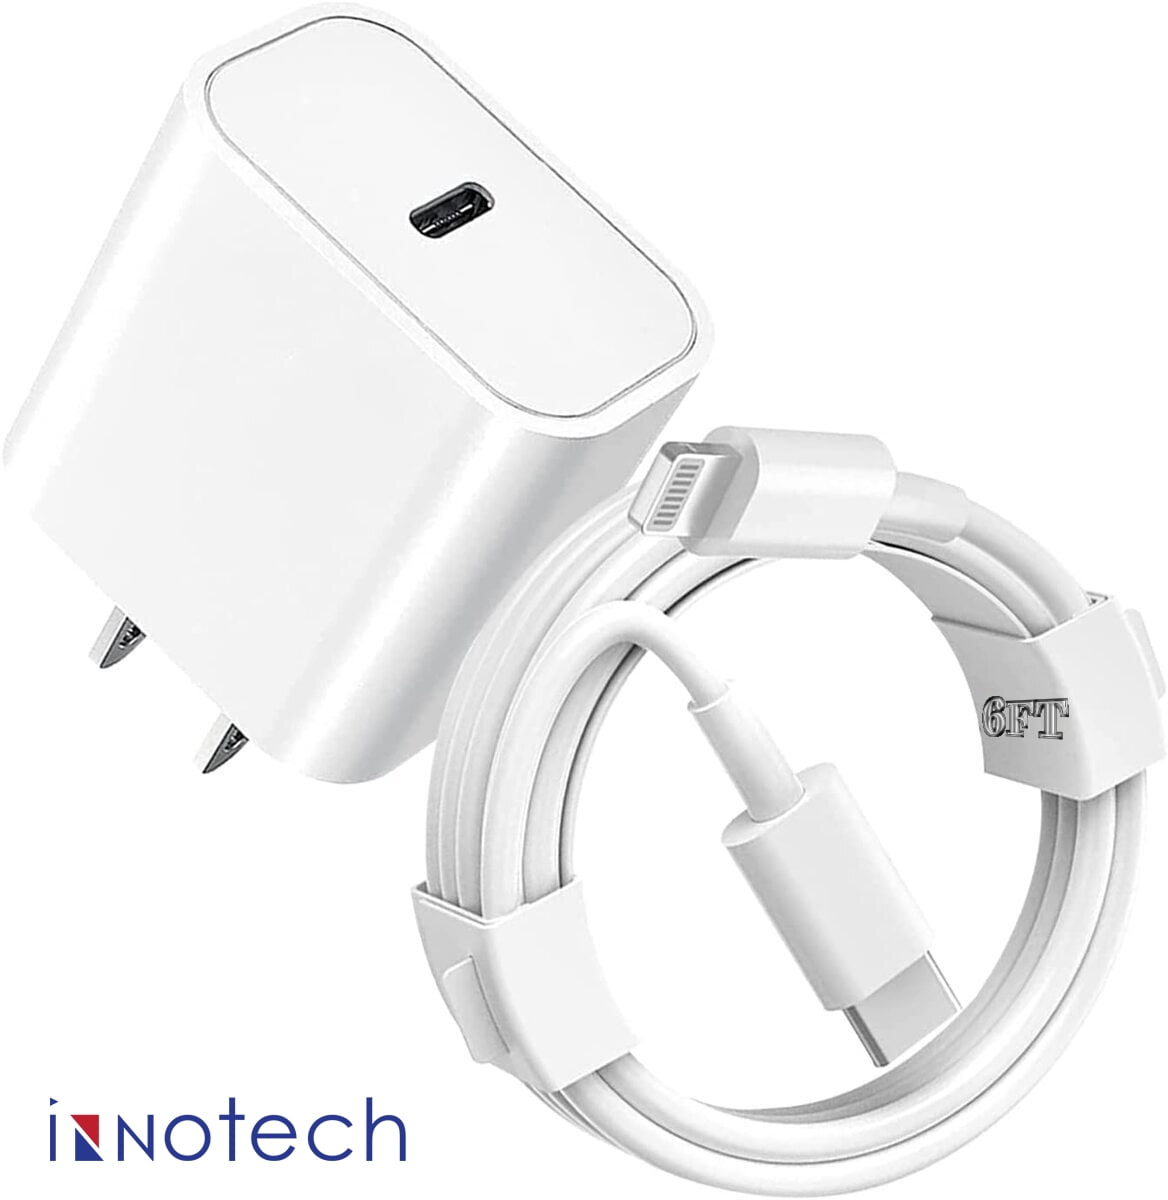 For Apple I phone Lighting Charger USB C Wall Charger Fast Charging 20W PD  ( MFI Certified) Adapter with 2Pcs 5FT Lighting Cable Compatible with iPhone  13/13 Pro/12/12 Pro,11/10/X X 